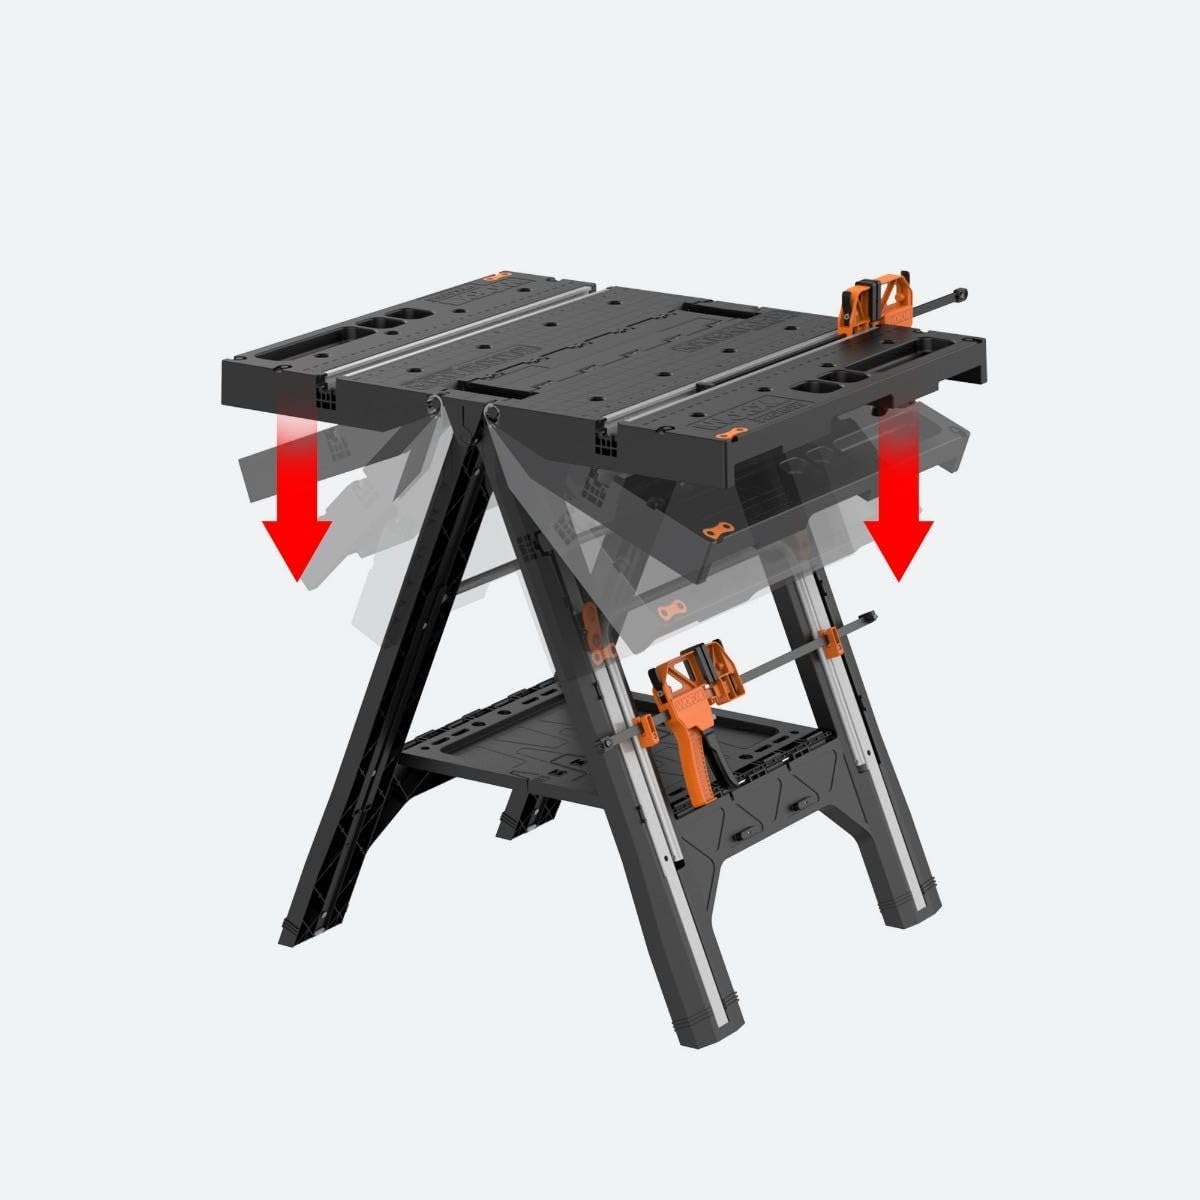 Top 6 Must-Have Workbenches and Tool Tables for Every Workshop